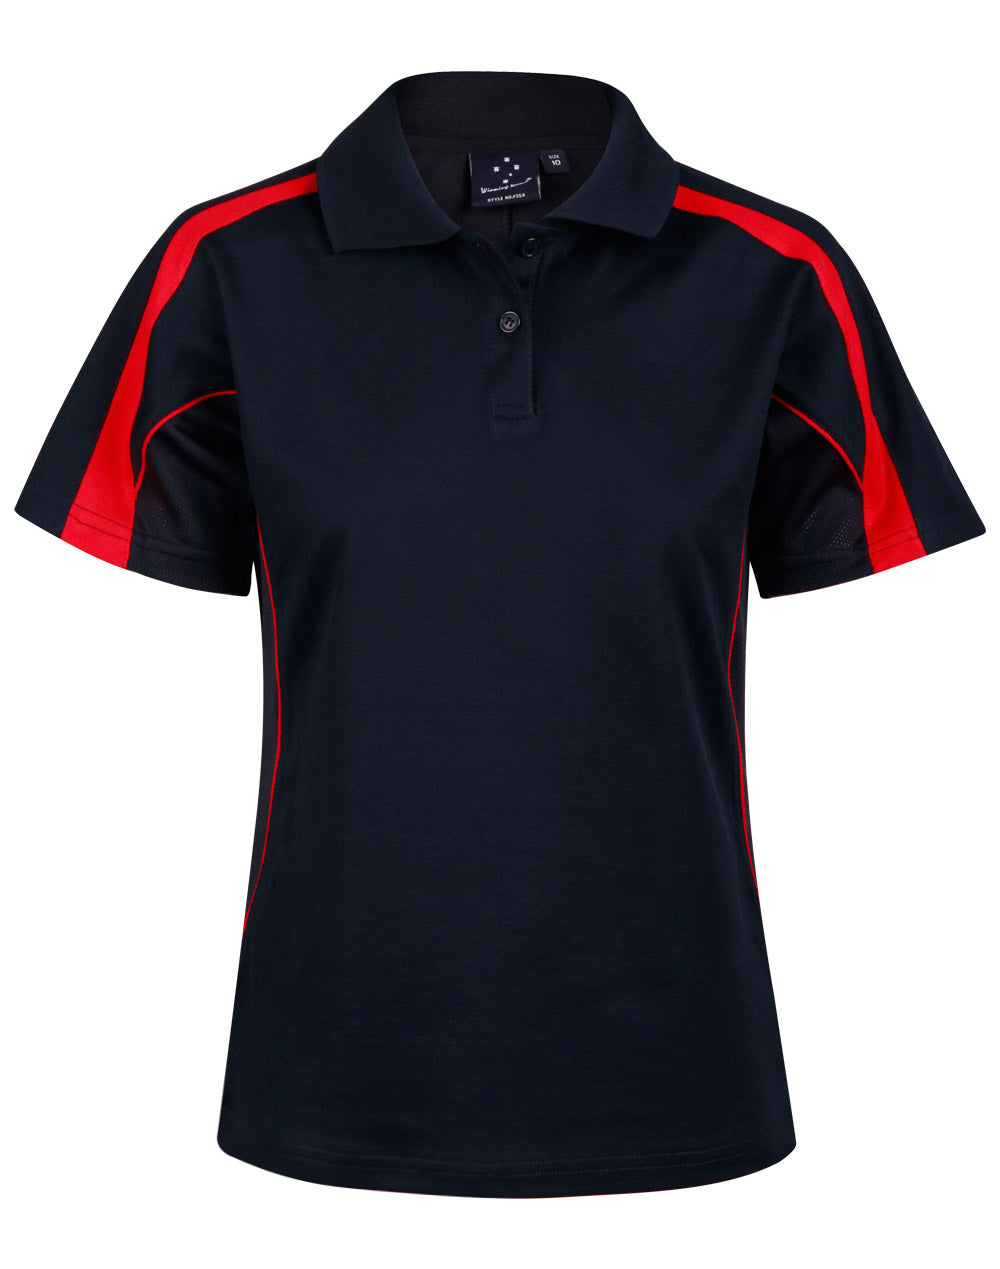 Ladies Legend Truedry Polo - made by AIW